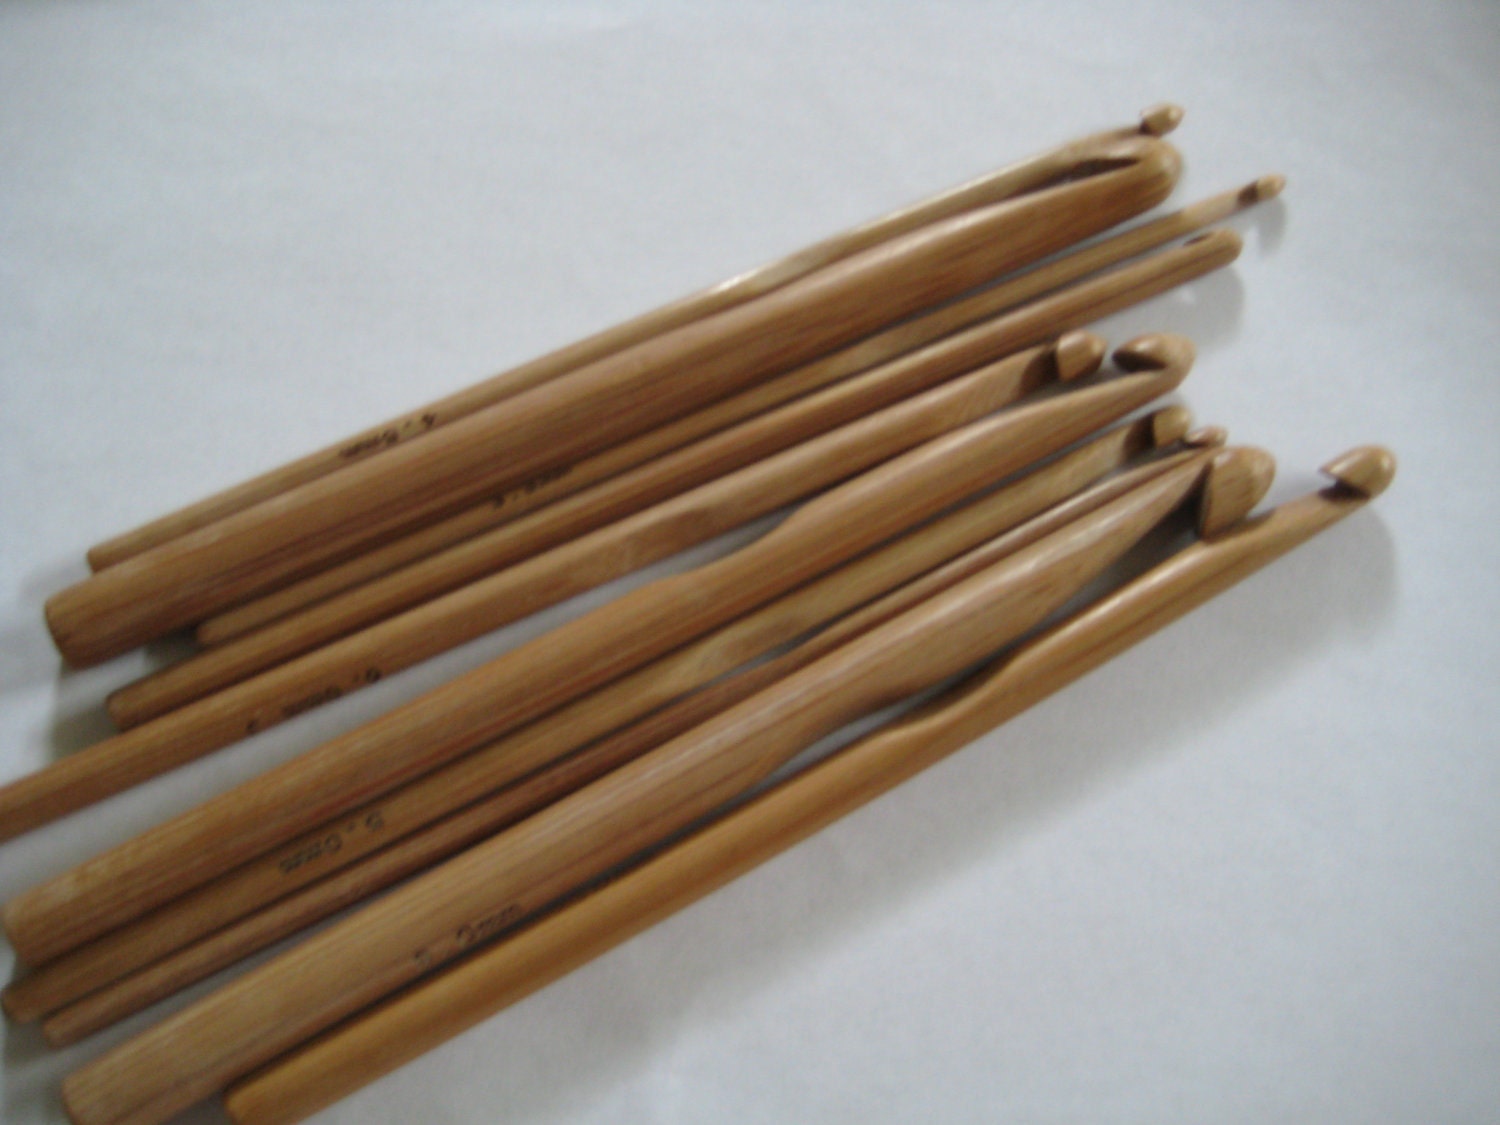 13 size Bamboo crochet hooks 2.75-10.0mm (A COMPLETE set from US size C to size N)